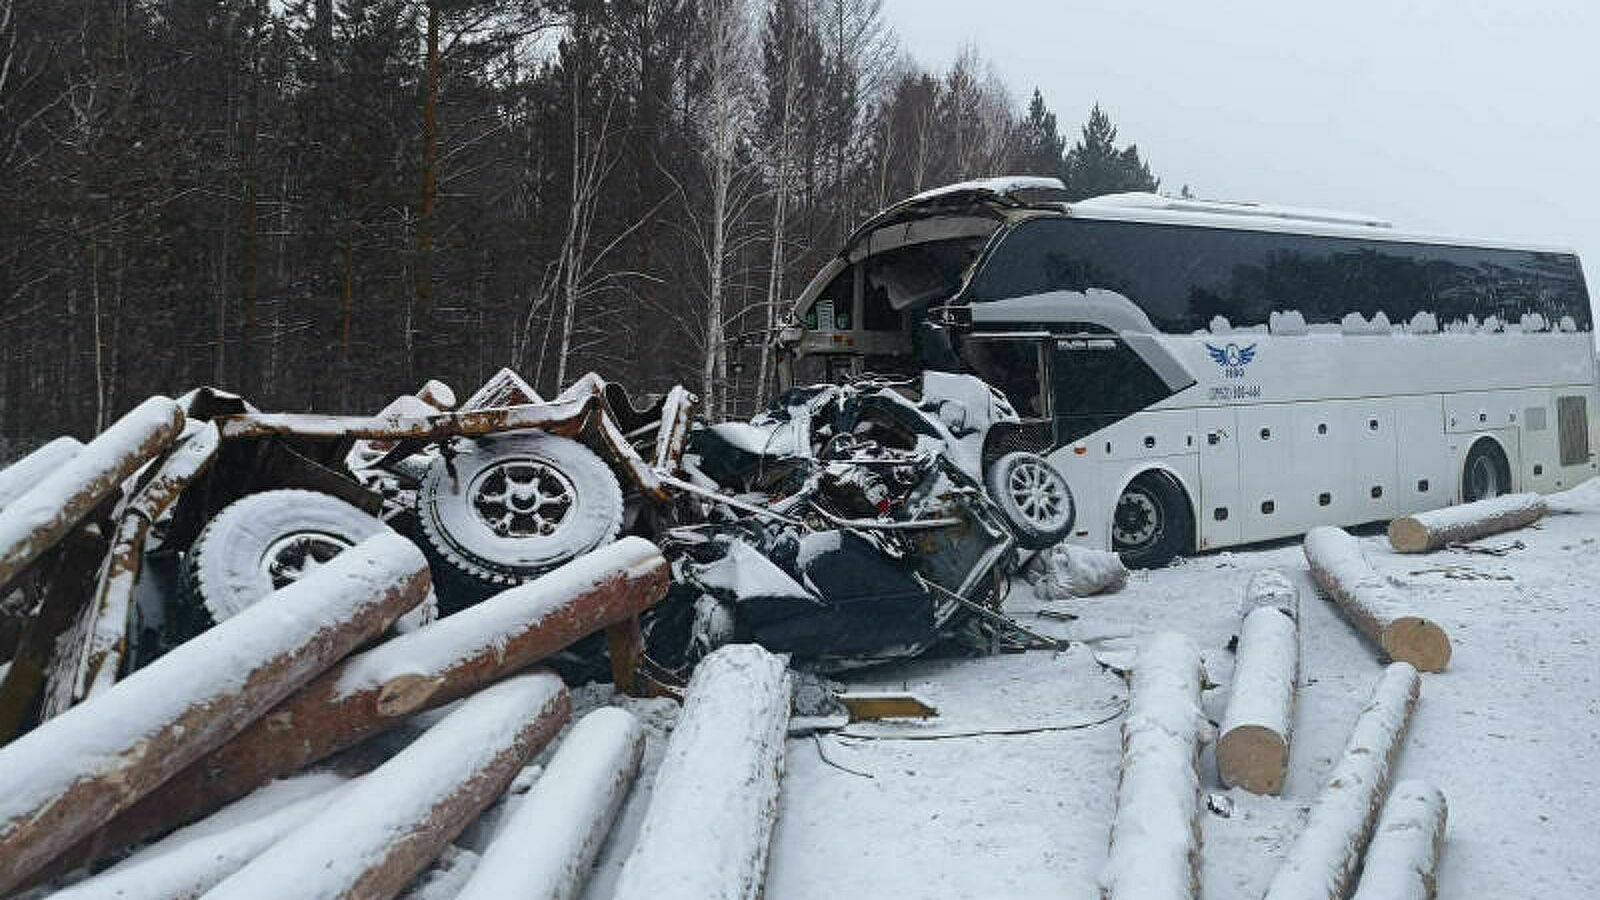 Five people died in an accident with a bus and a timber truck near Irkutsk